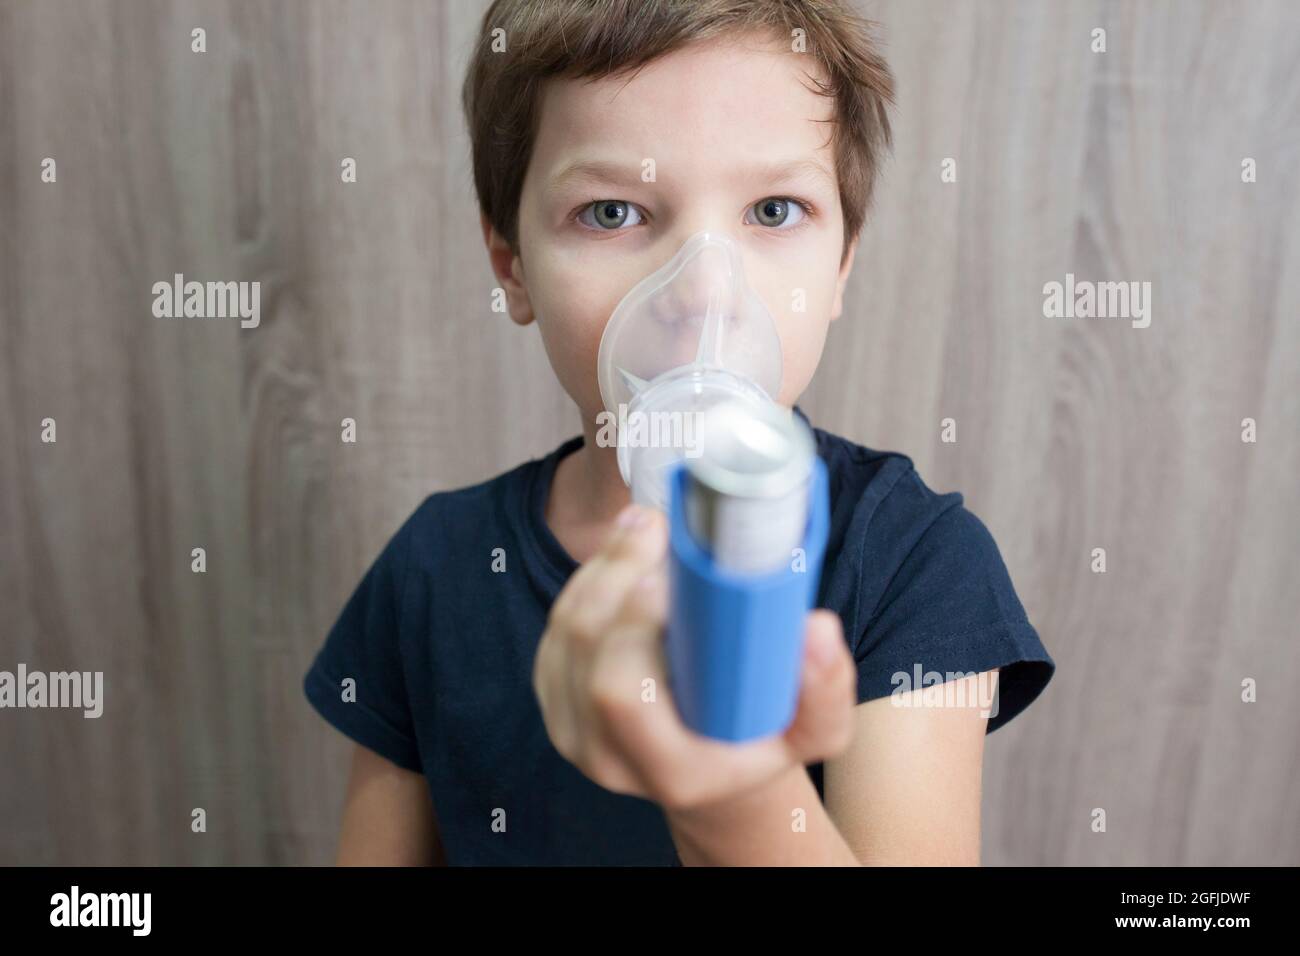 Child boy using medical spray for breath. Inhaler, spacer and mask. Front view Stock Photo